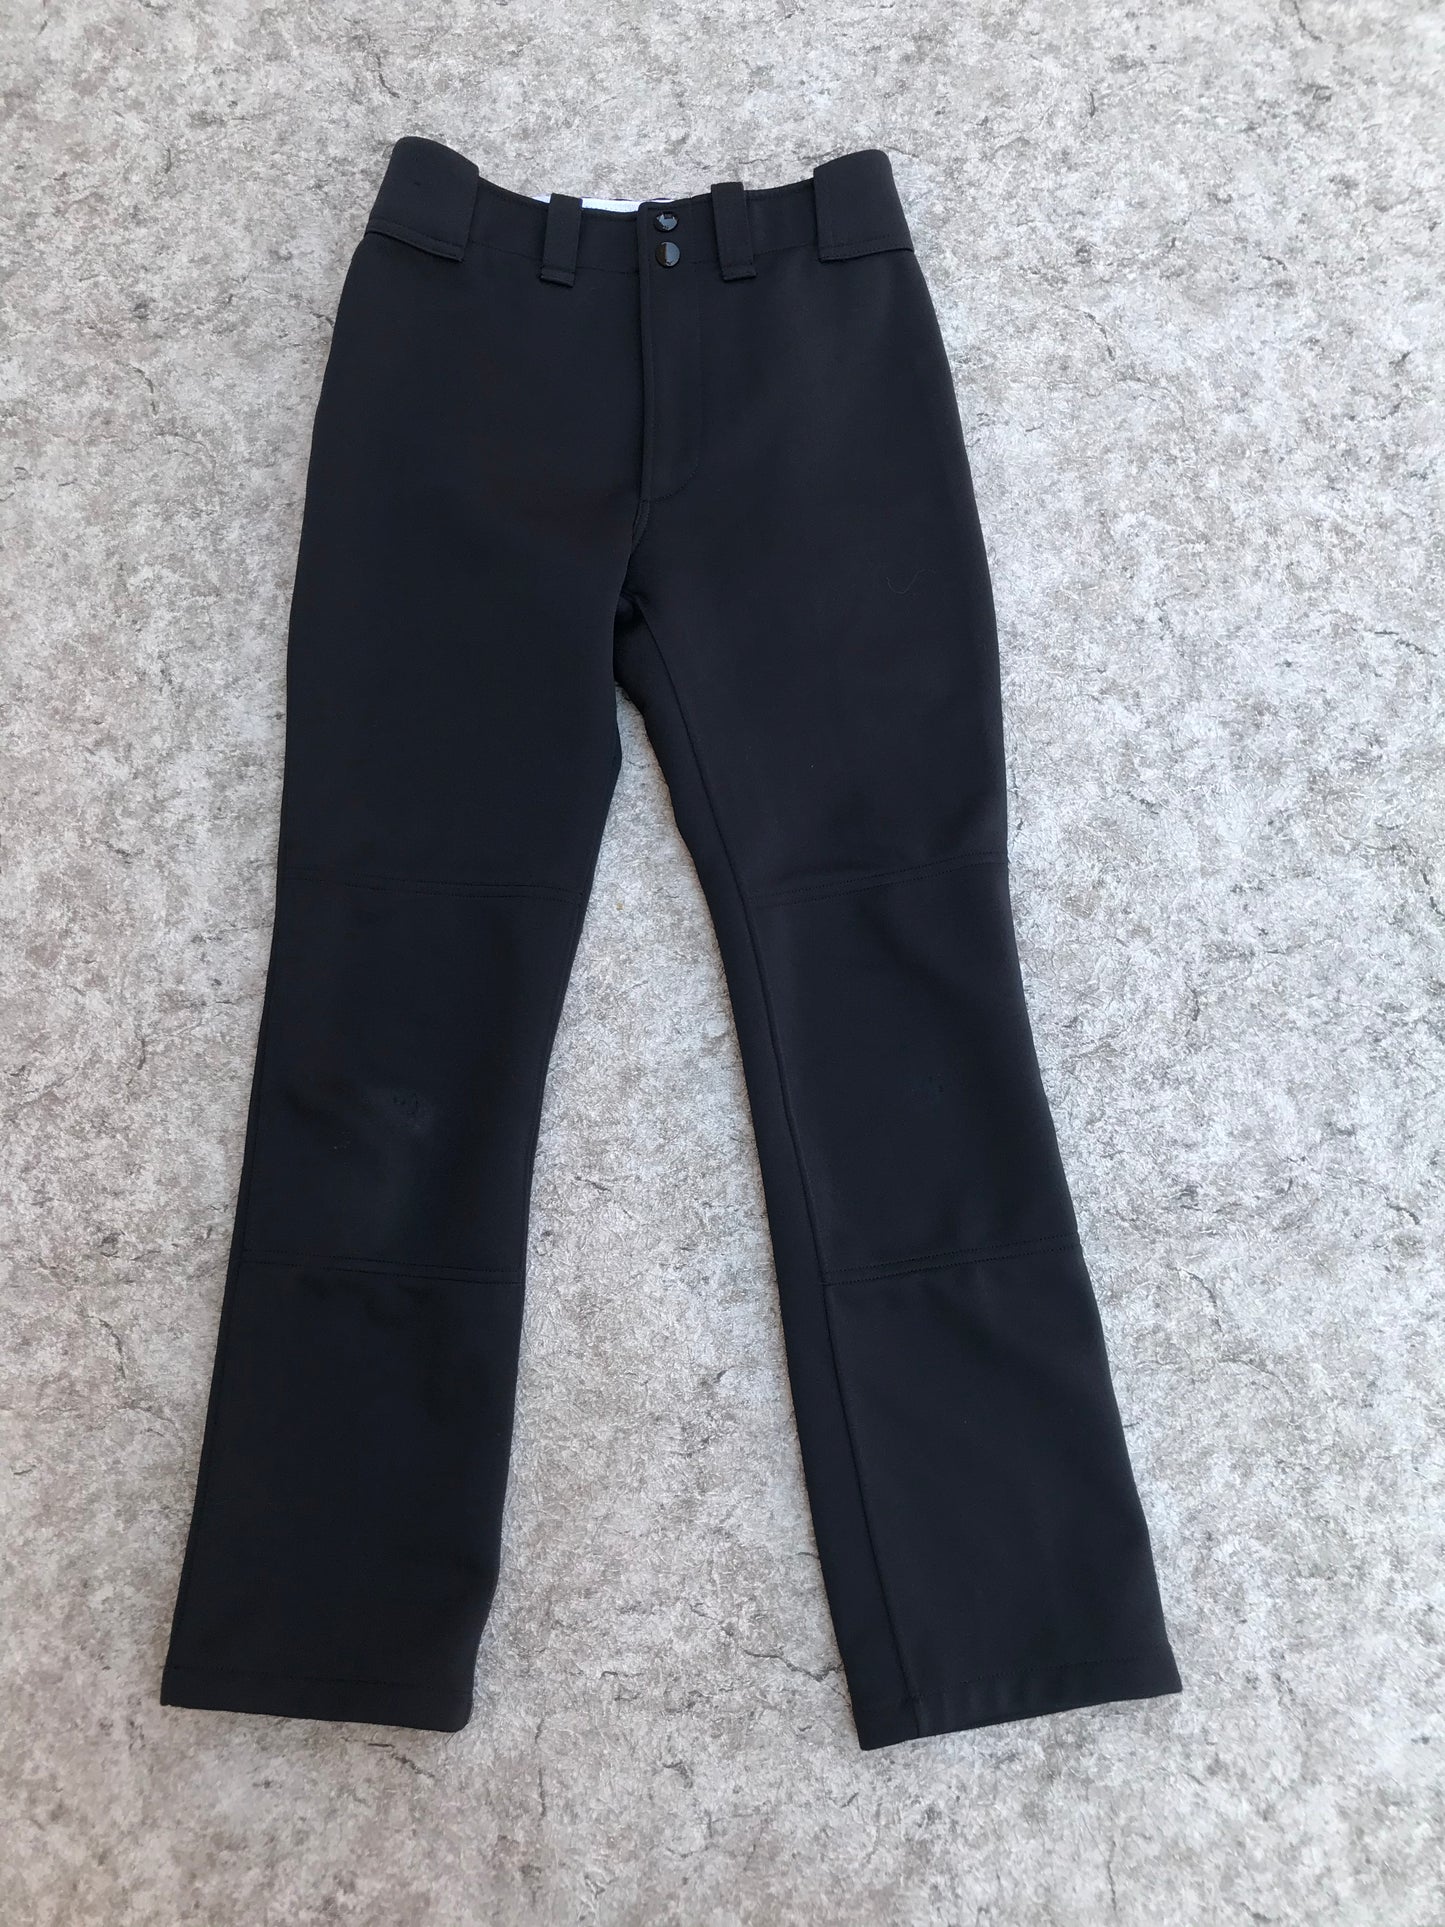 Baseball Pants Child Size X large Youth Mizuno Black Excellent